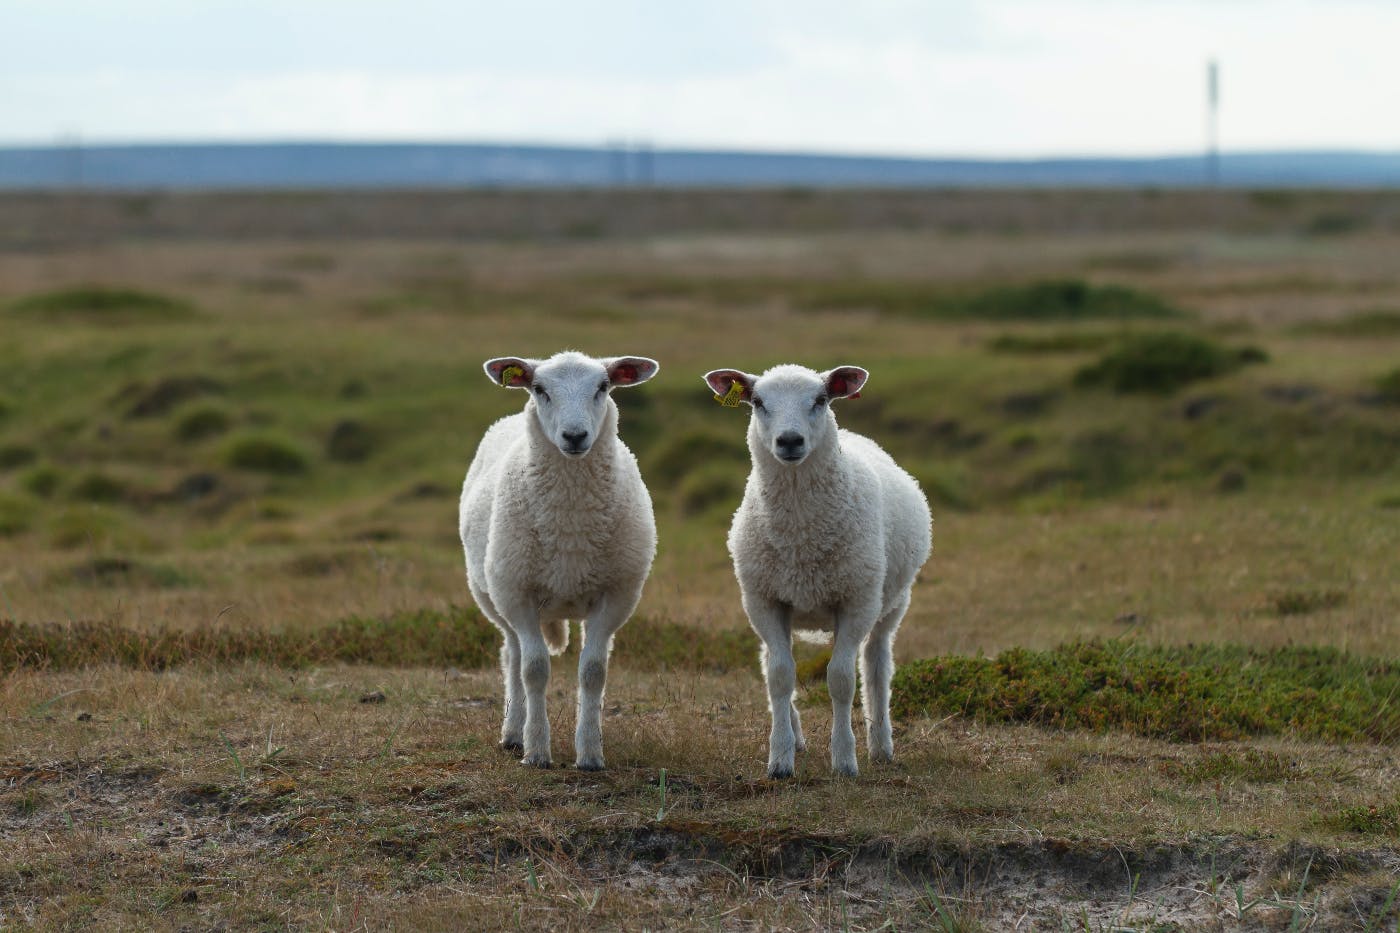 Two seemingly identical sheep